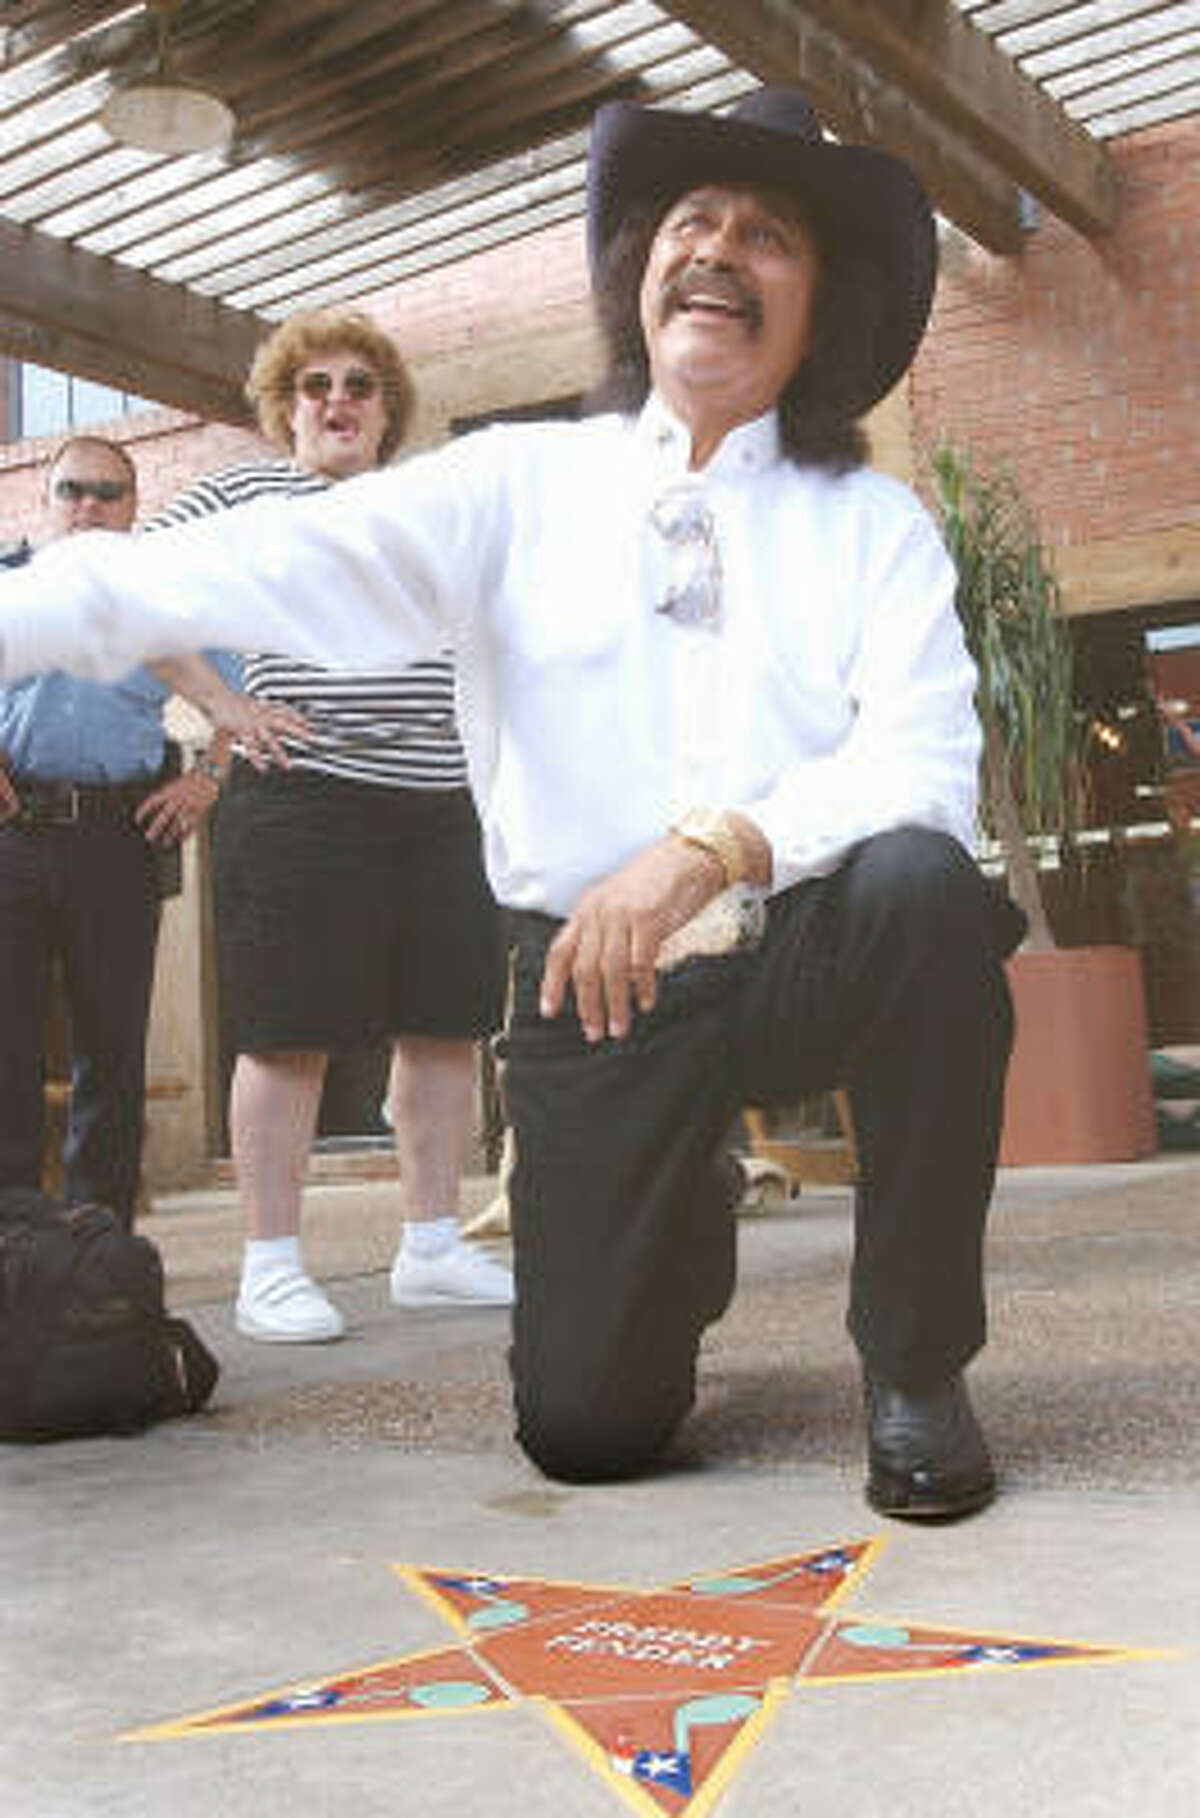 Freddy Fender is shown with his star on the South Texas Music Walk of Fame in Corpus Christi in 2005.